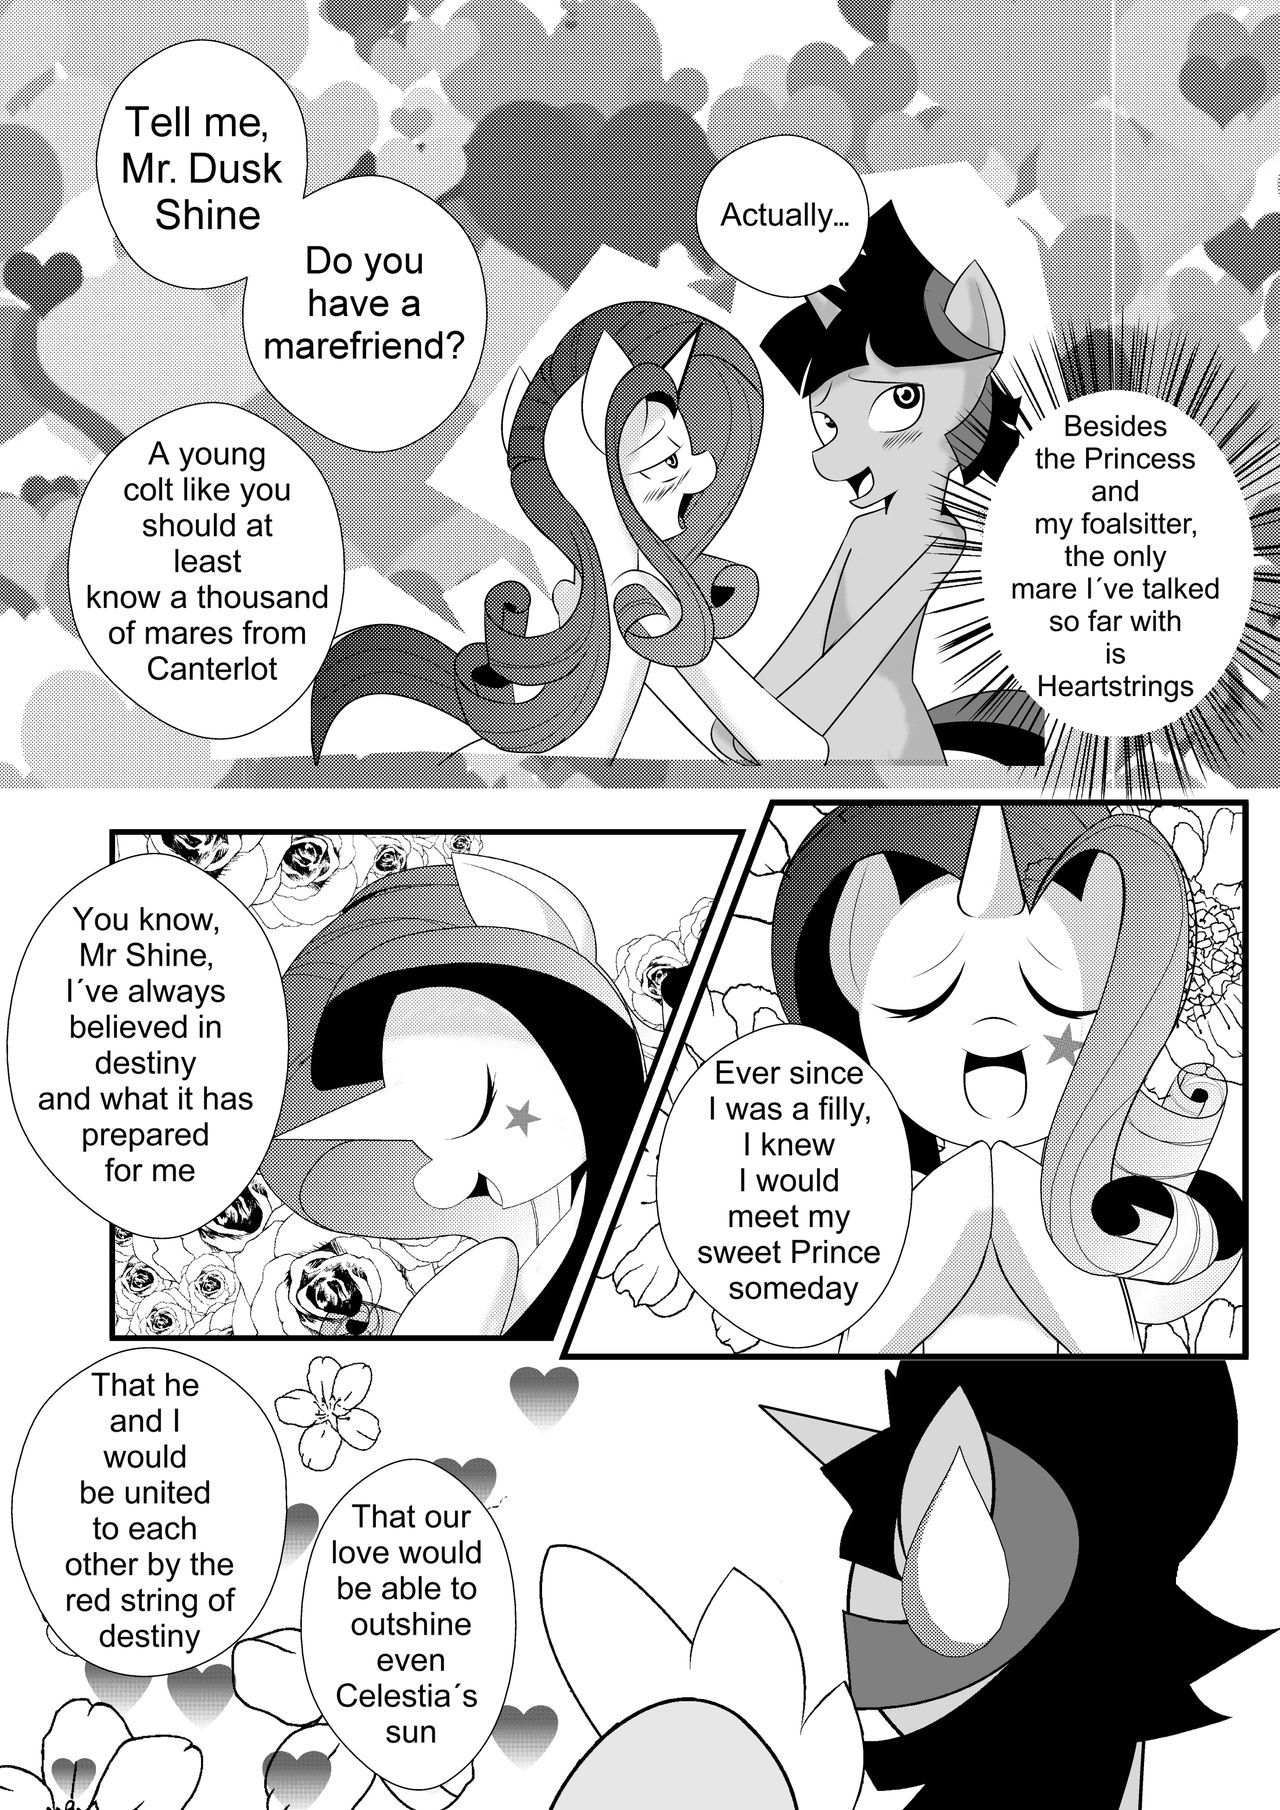 The Unexpected Love Life of Dusk Shine - Hi-Res [ENG] (in progress) 41